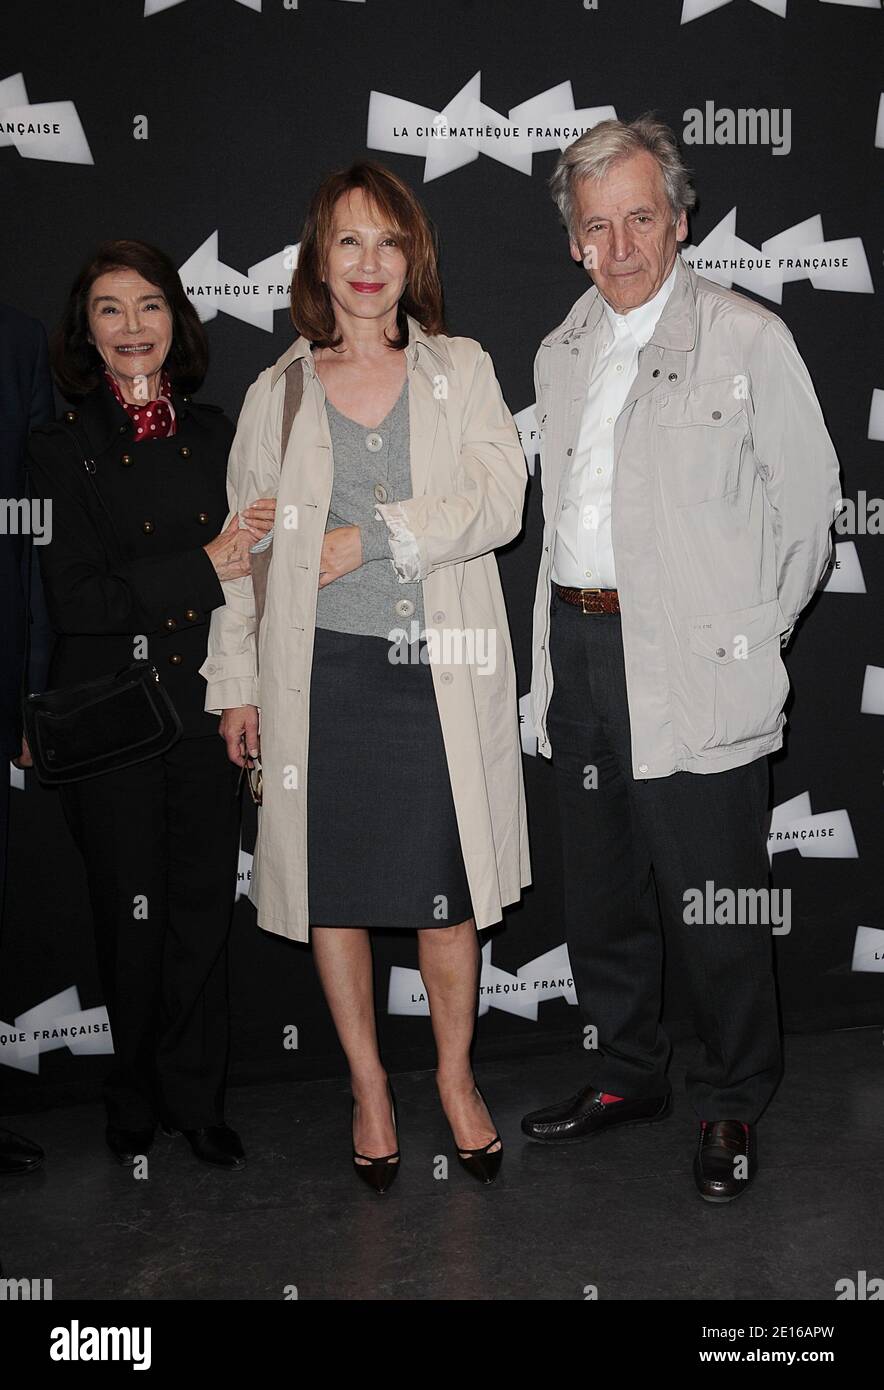 Marisa Pavan Aumont, Nathalie Baye and Constantin Costa-Gavras attend a  tribute for Jean-Pierre Amont at the Cinematheque in Paris, France on May  2, 2011. Photo by Giancarlo Gorassini/ABACAPRESS.COM Stock Photo - Alamy